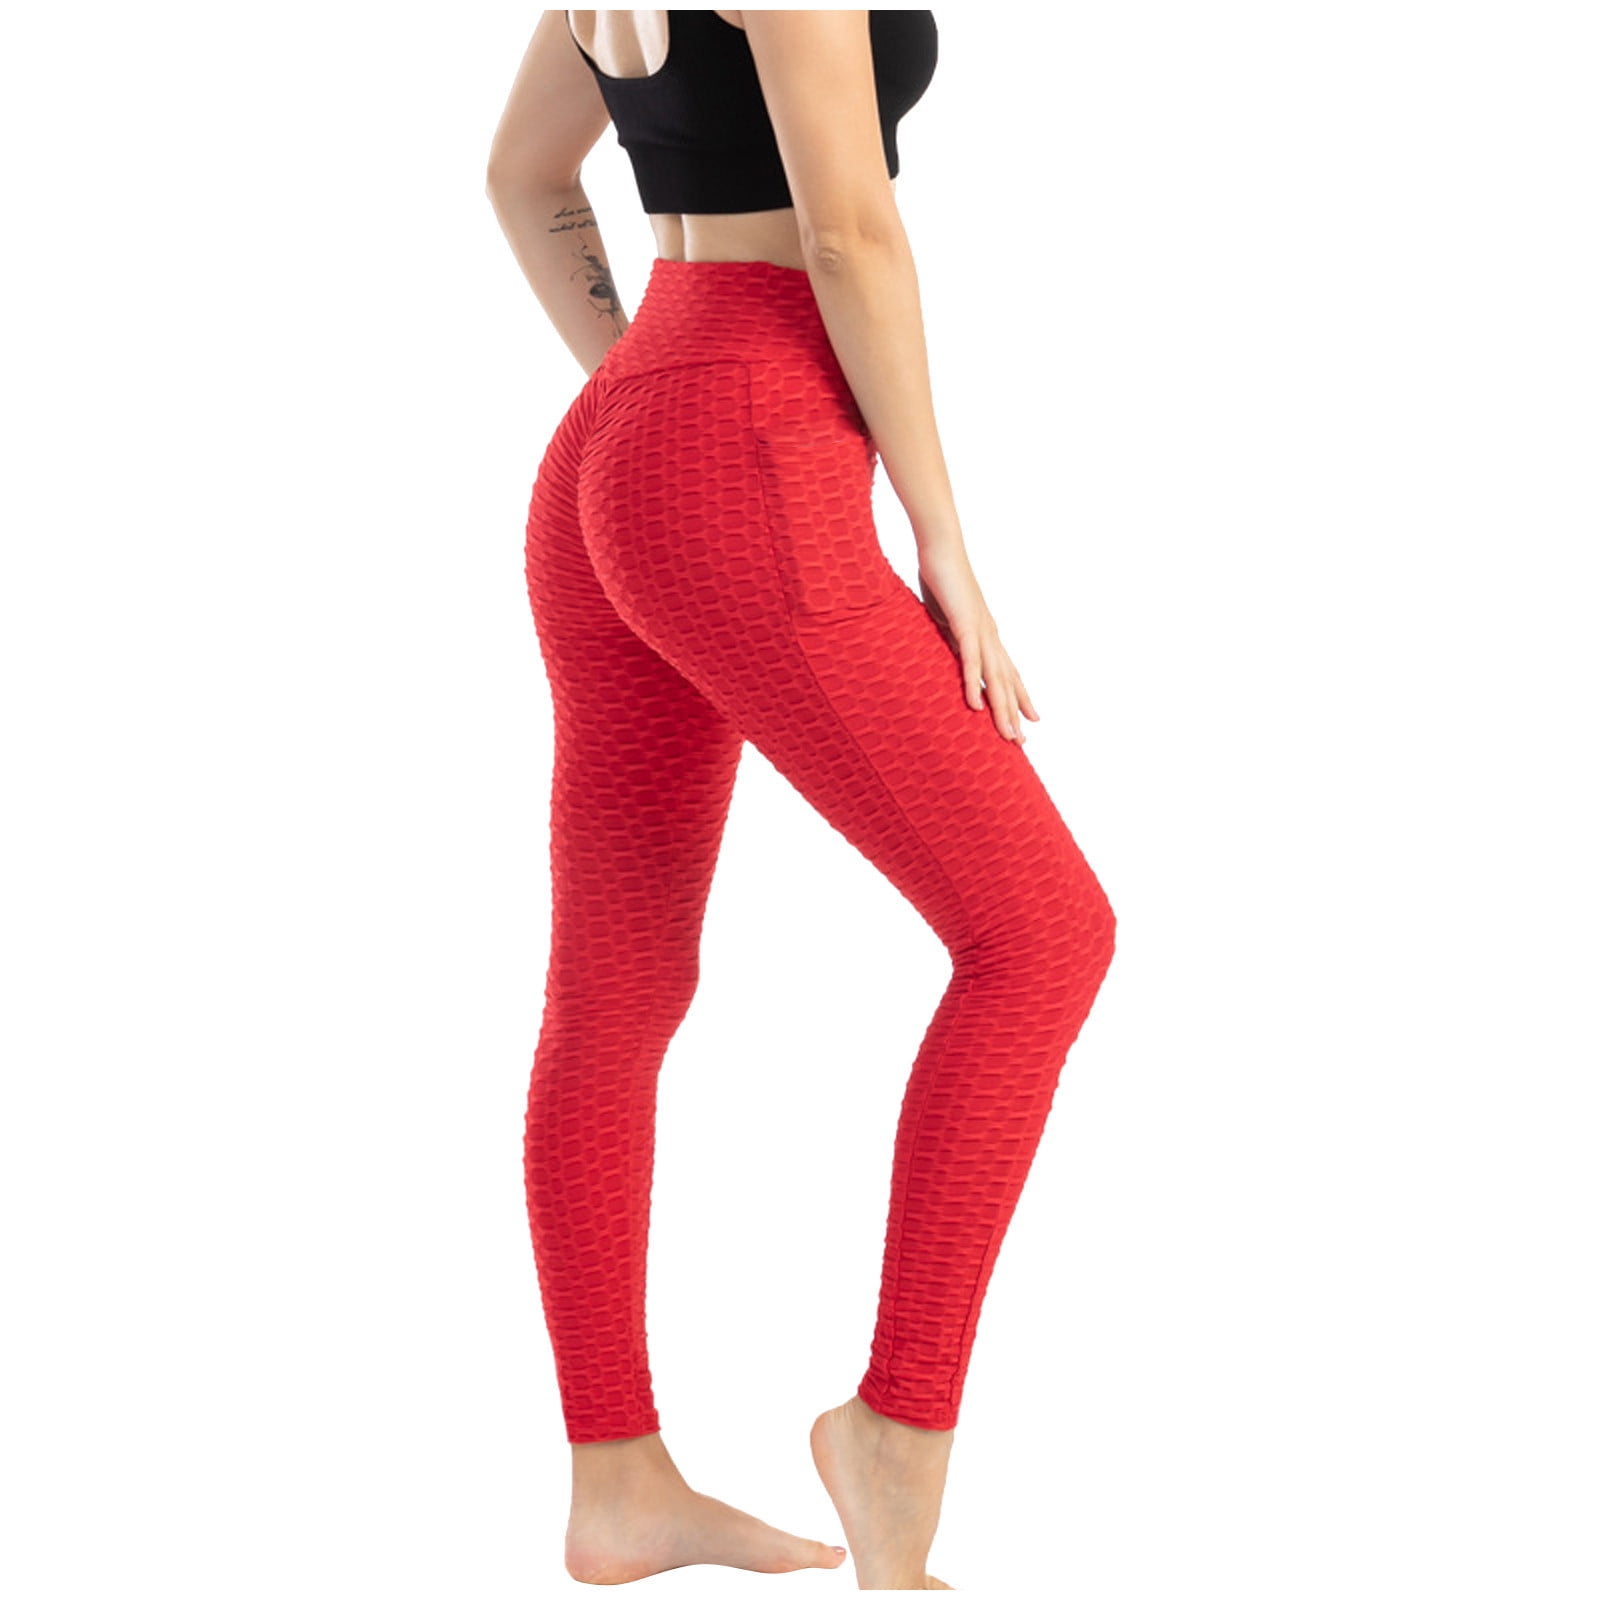 Womens Bubble Workout Yoga Leggings with Side Pocket High Waist Scrunch  Peach Butt Lifting Tummy Control Active Pants 